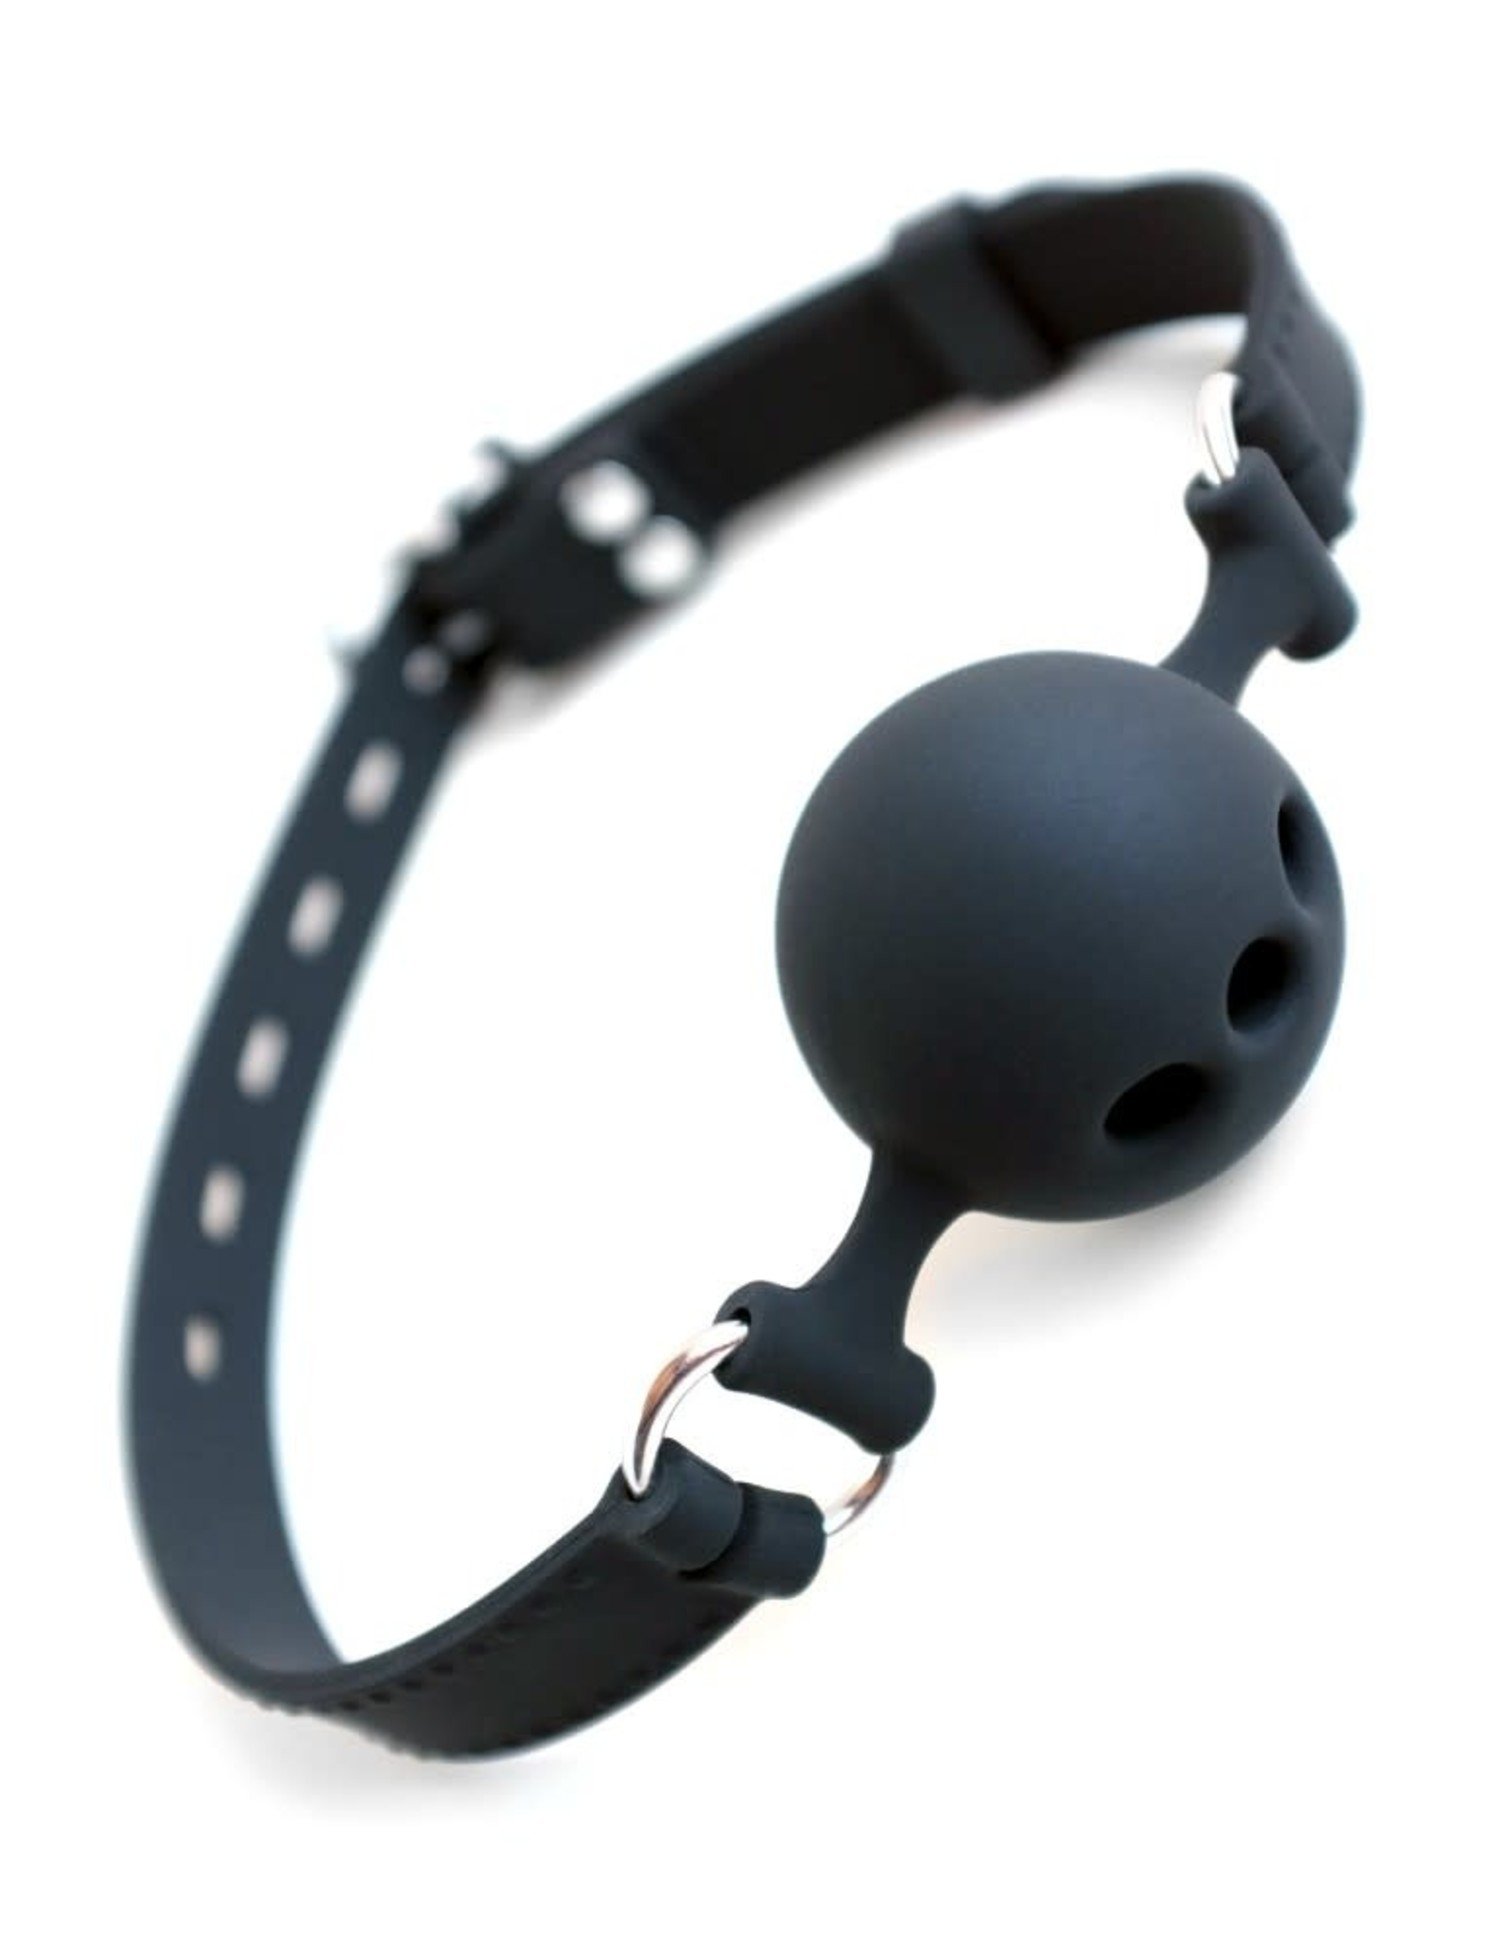 Breathable Silicone Ball Gag, Premium Mouth Gags